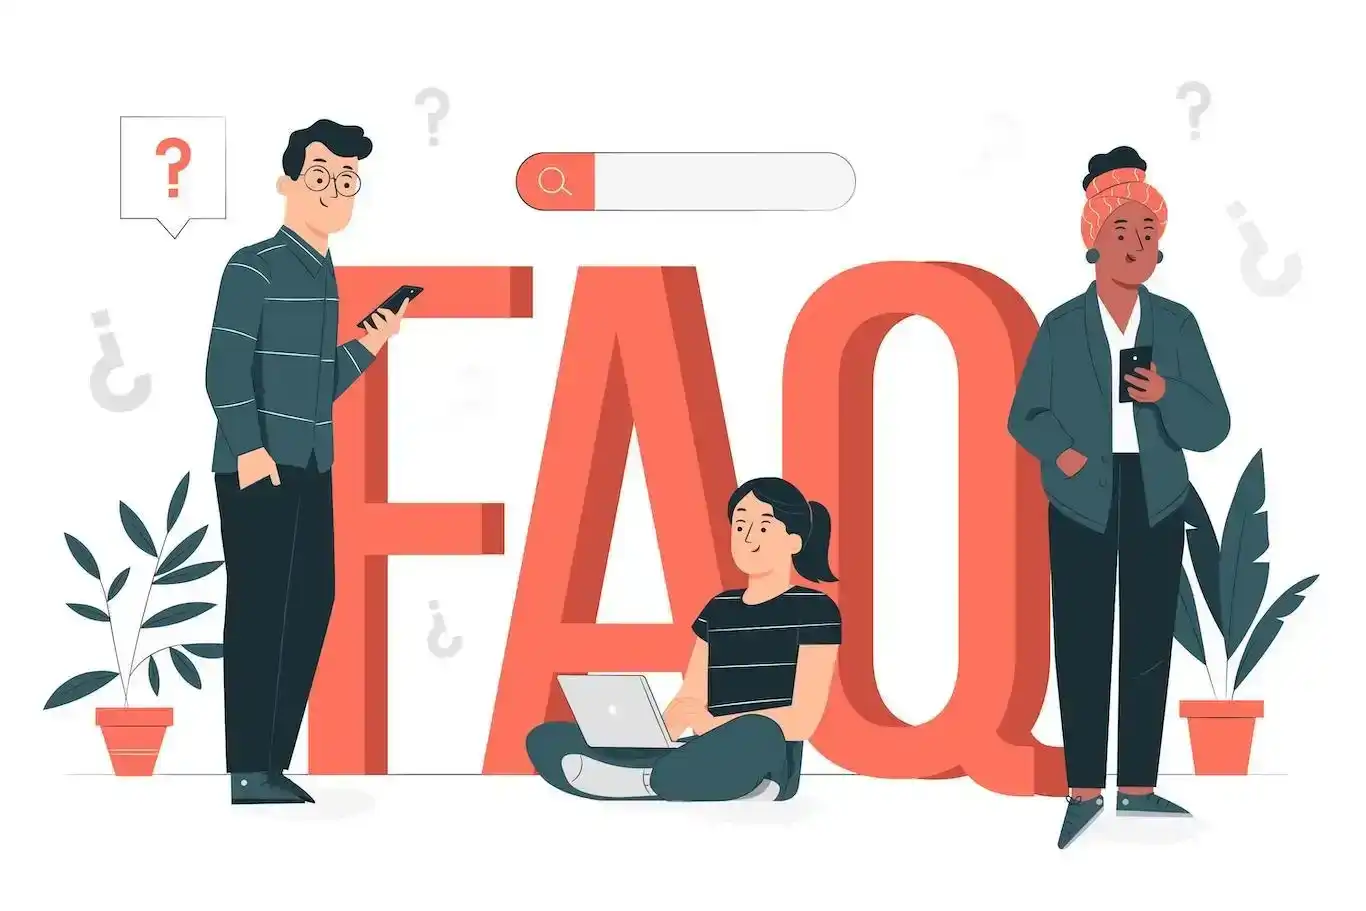 Illustration of the letters 'FAQ' in large, with three individuals searching for answers in their phones and laptop.